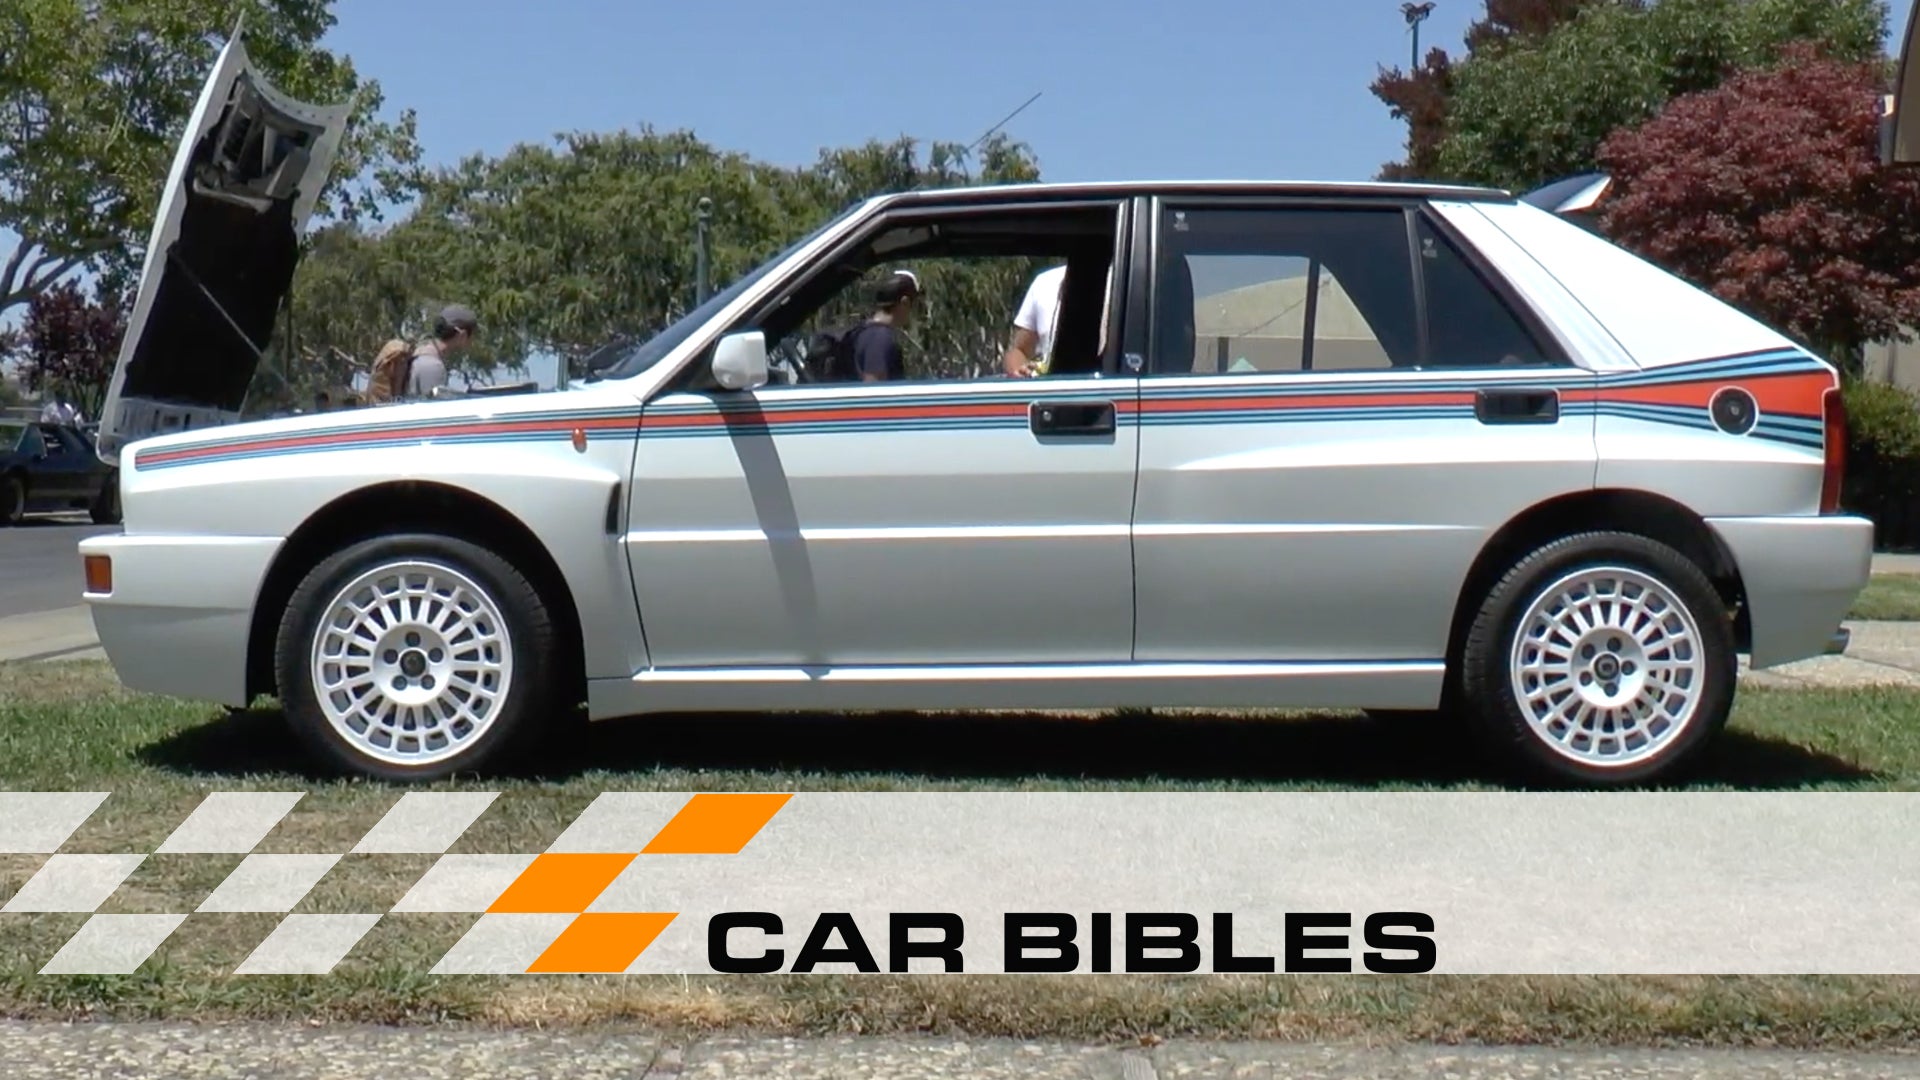 The Lancia Delta Integrale Didn’t Need a Coolness Boost but It Got One Anyway